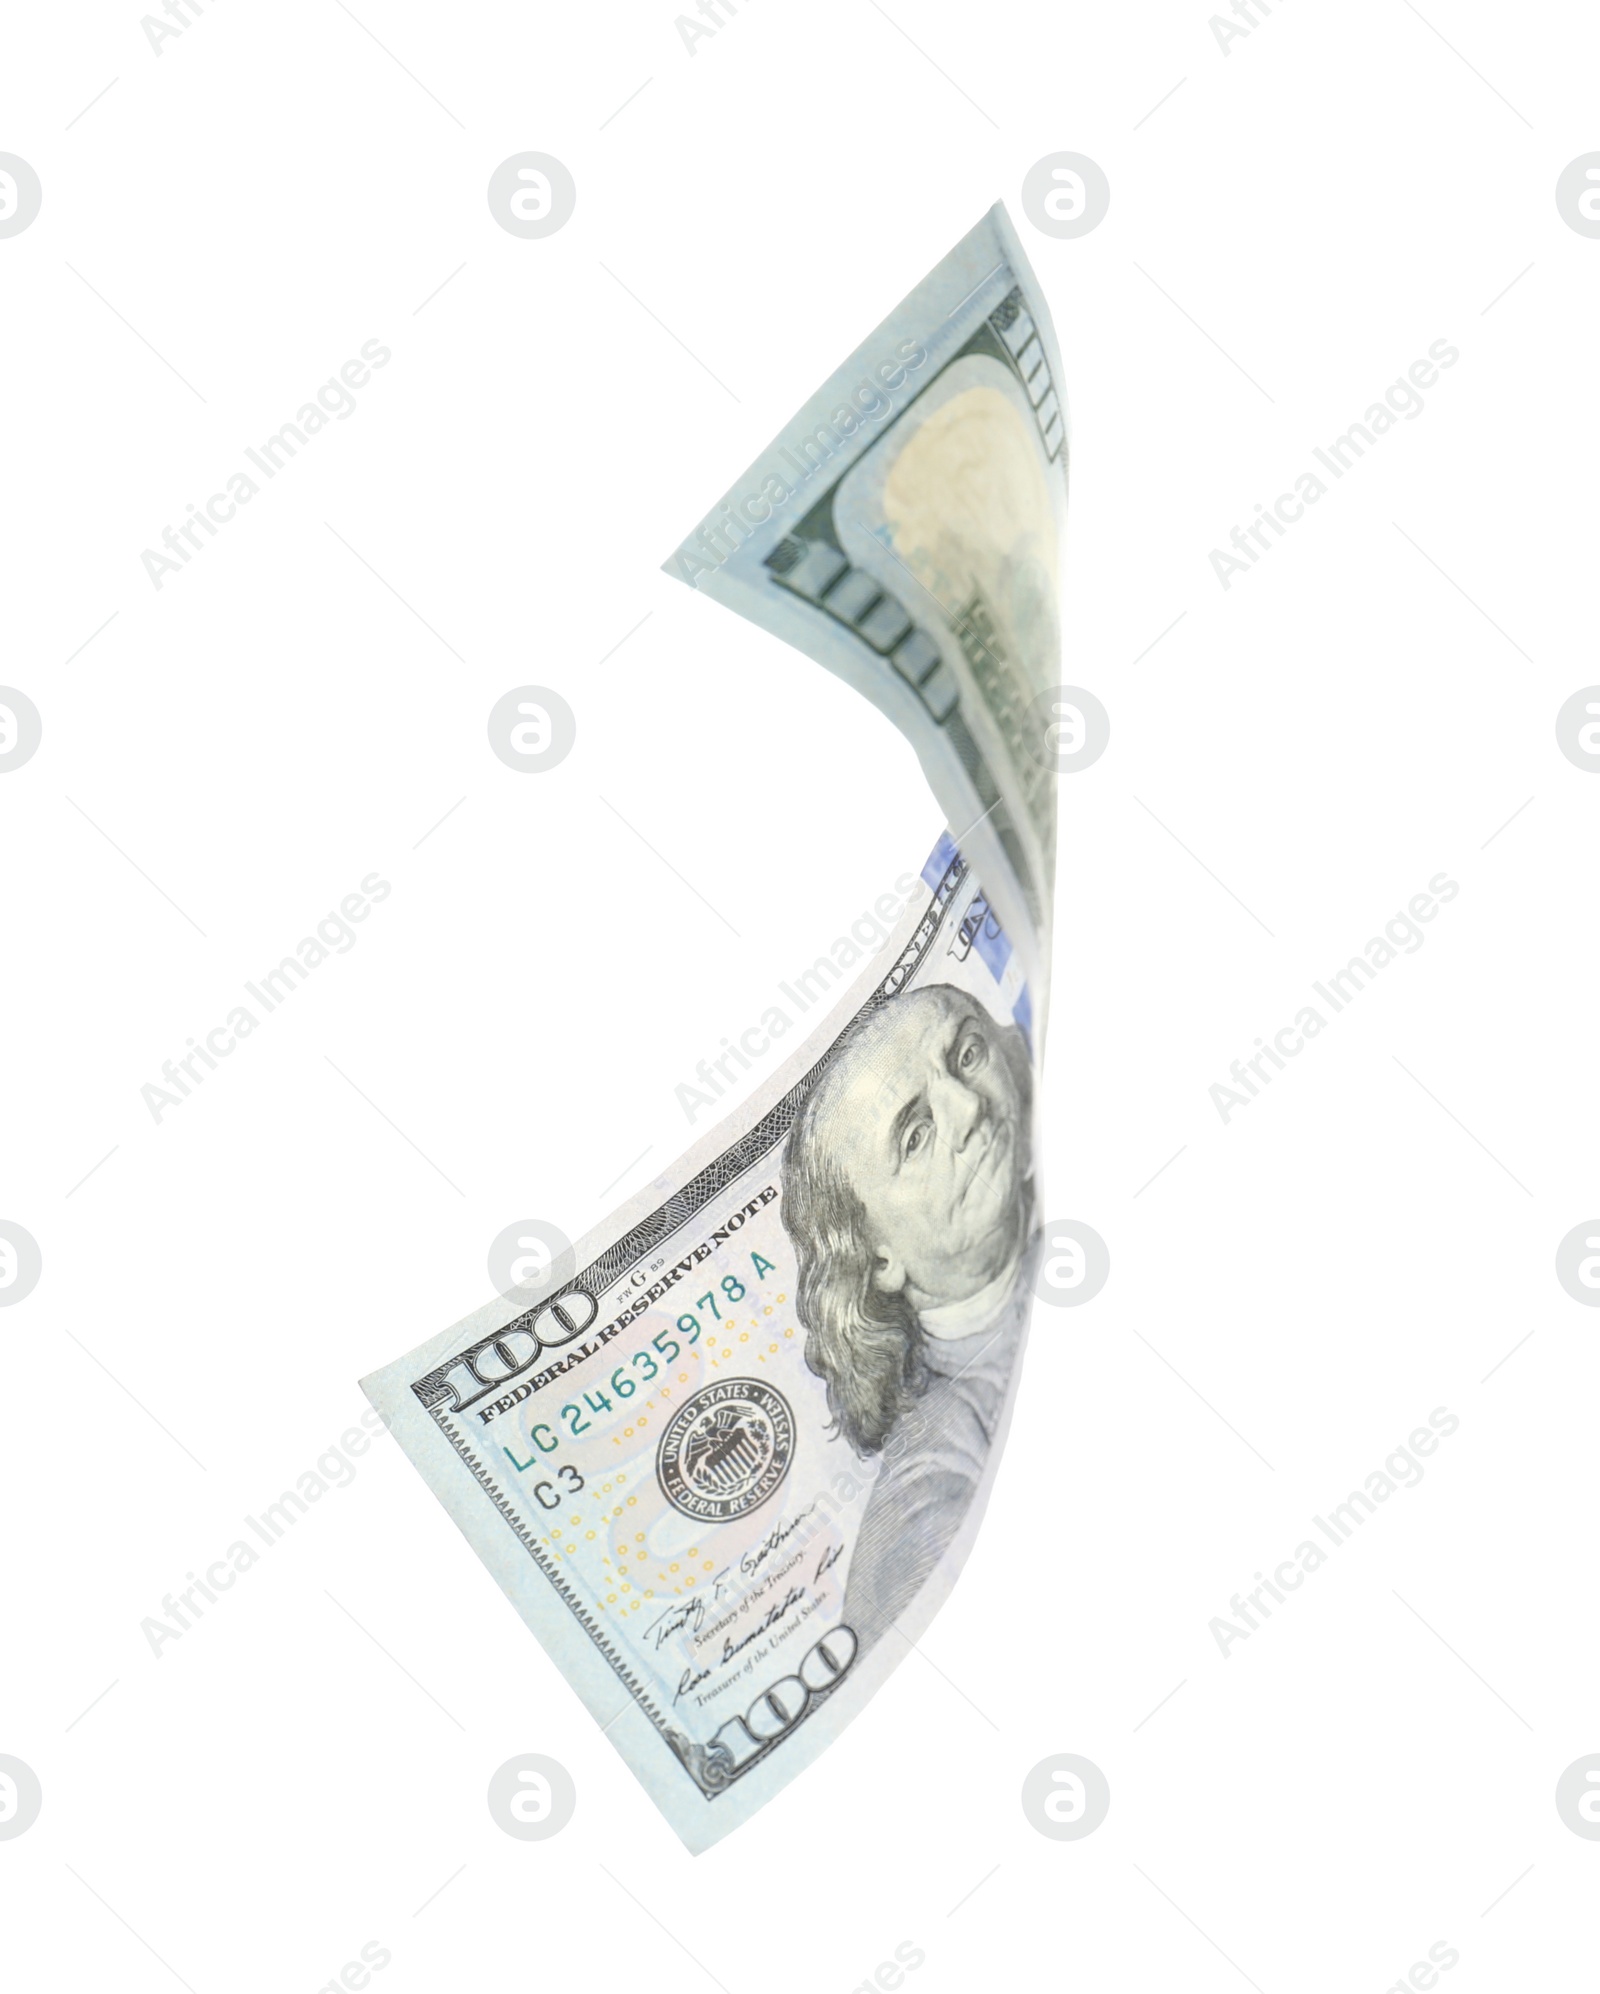 Photo of One dollar banknote on white background. National American currency